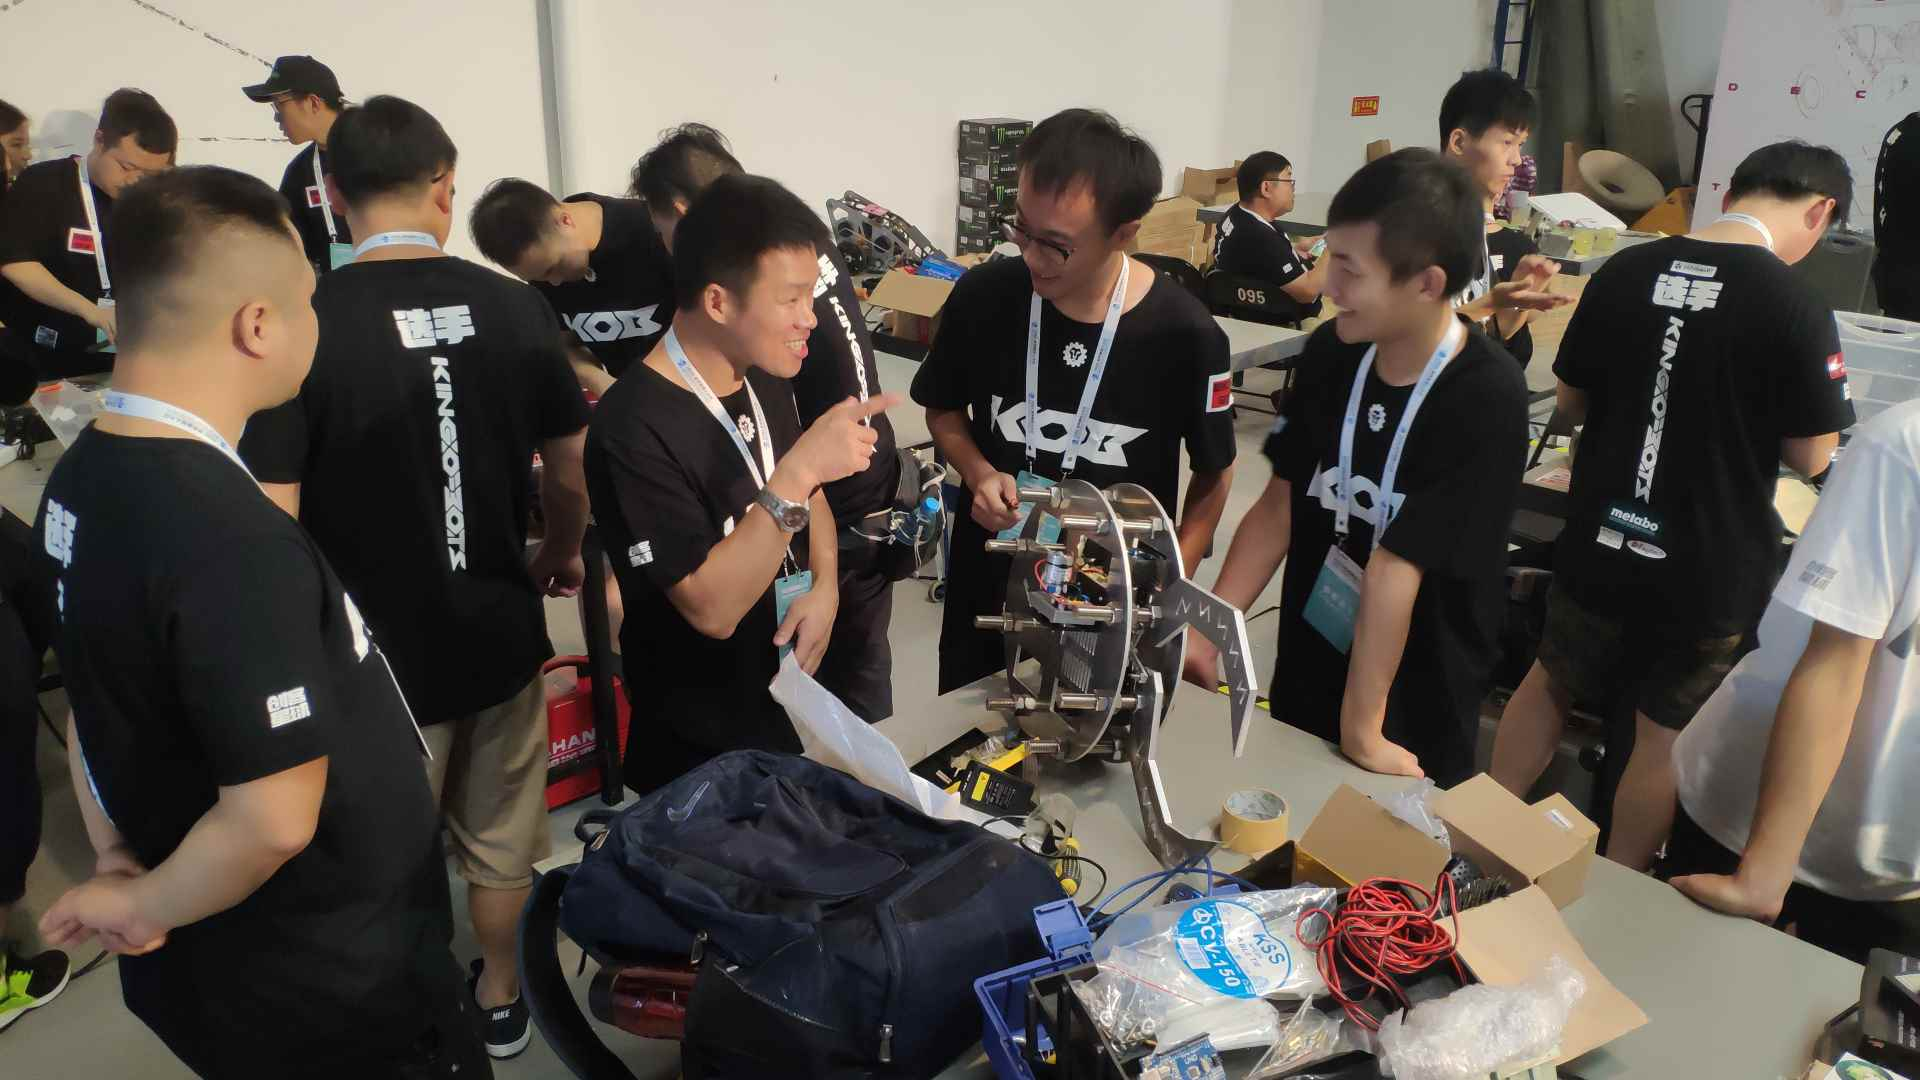 Beijing robot show 2018 showcases familiar tech, but with more flair